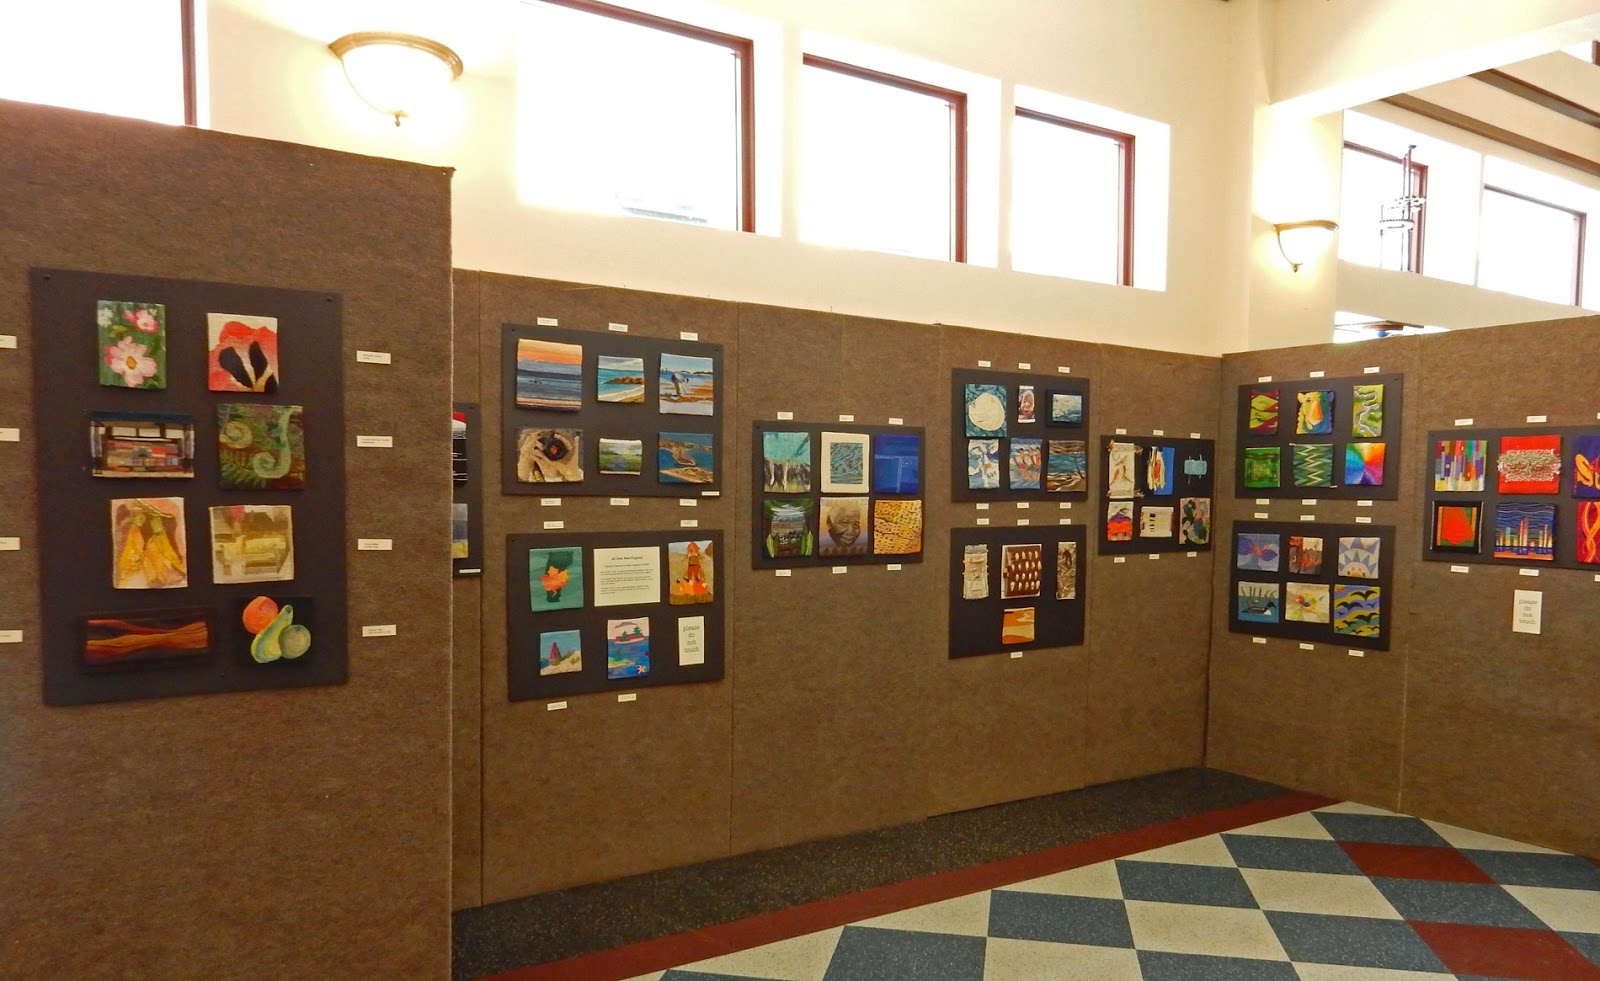 The Convergence exhibit in July 2014 (image from Tangled Web, 
http://austintapestry.blogspot.com/2014_07_01_archive.html)